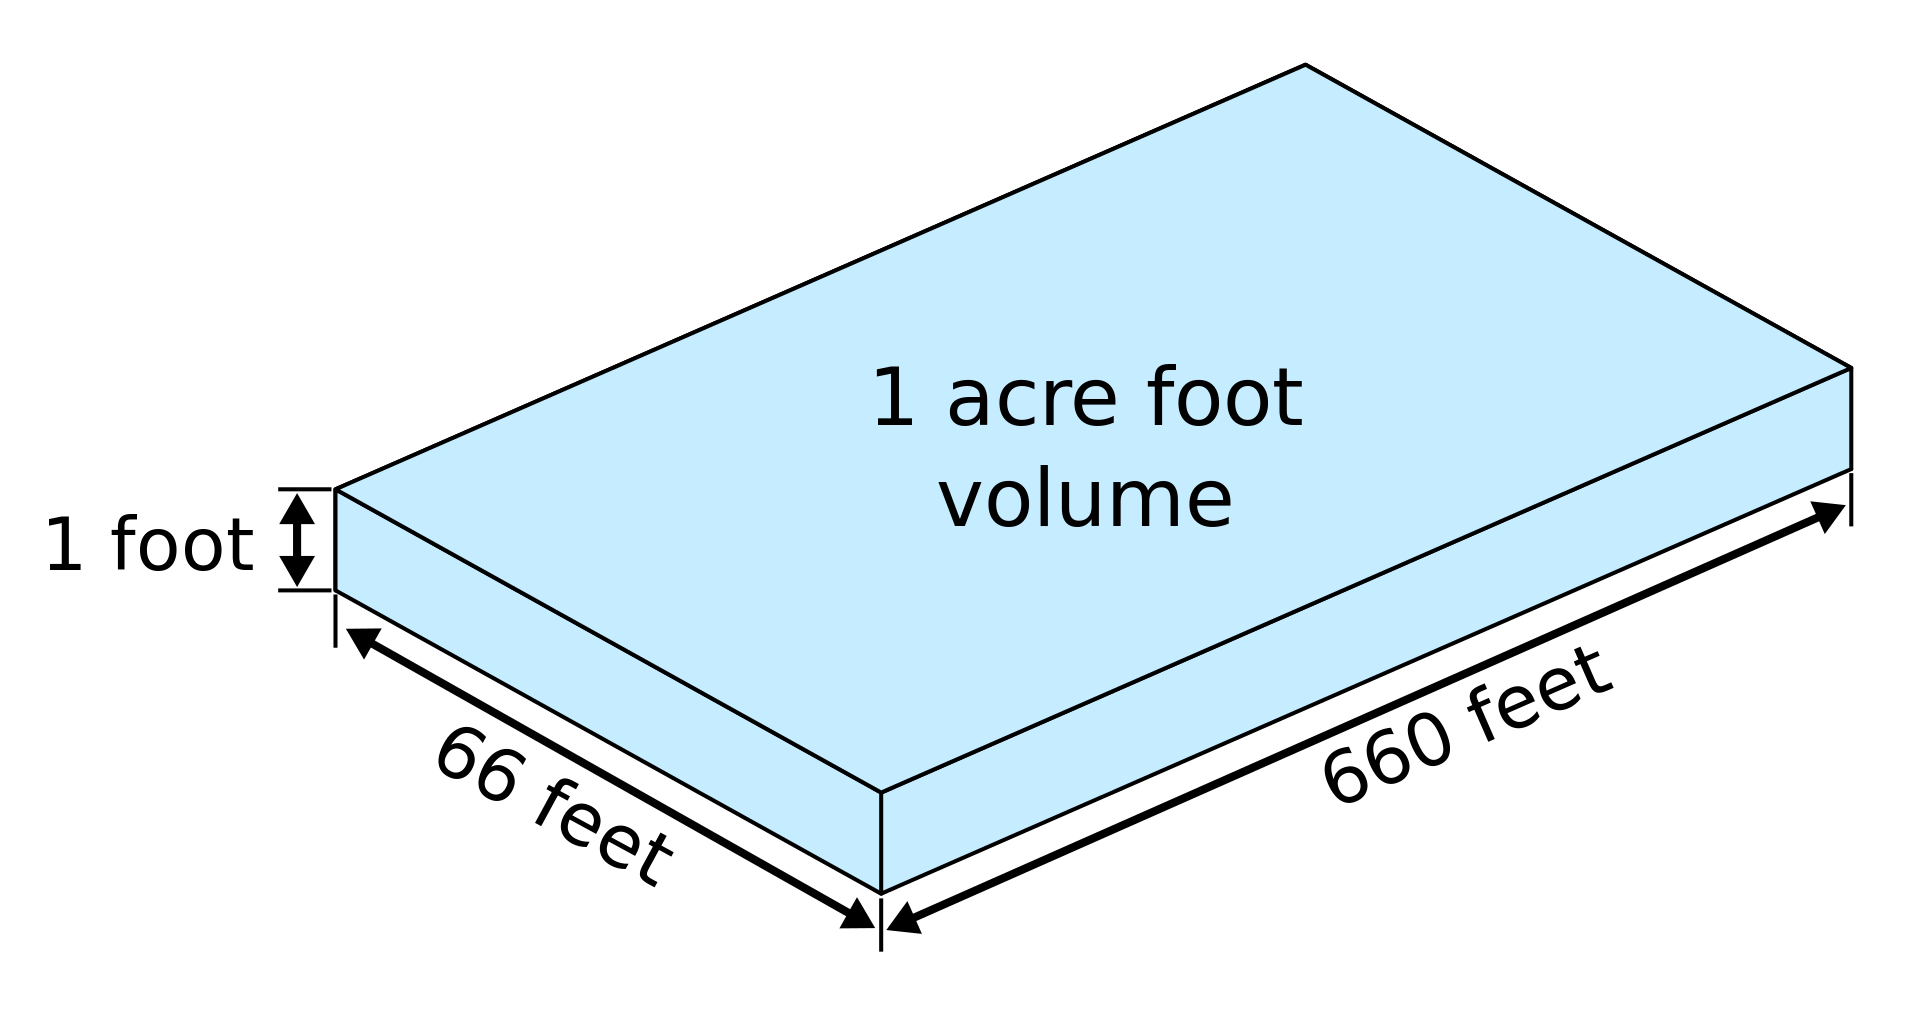 Volume of one acre-foot